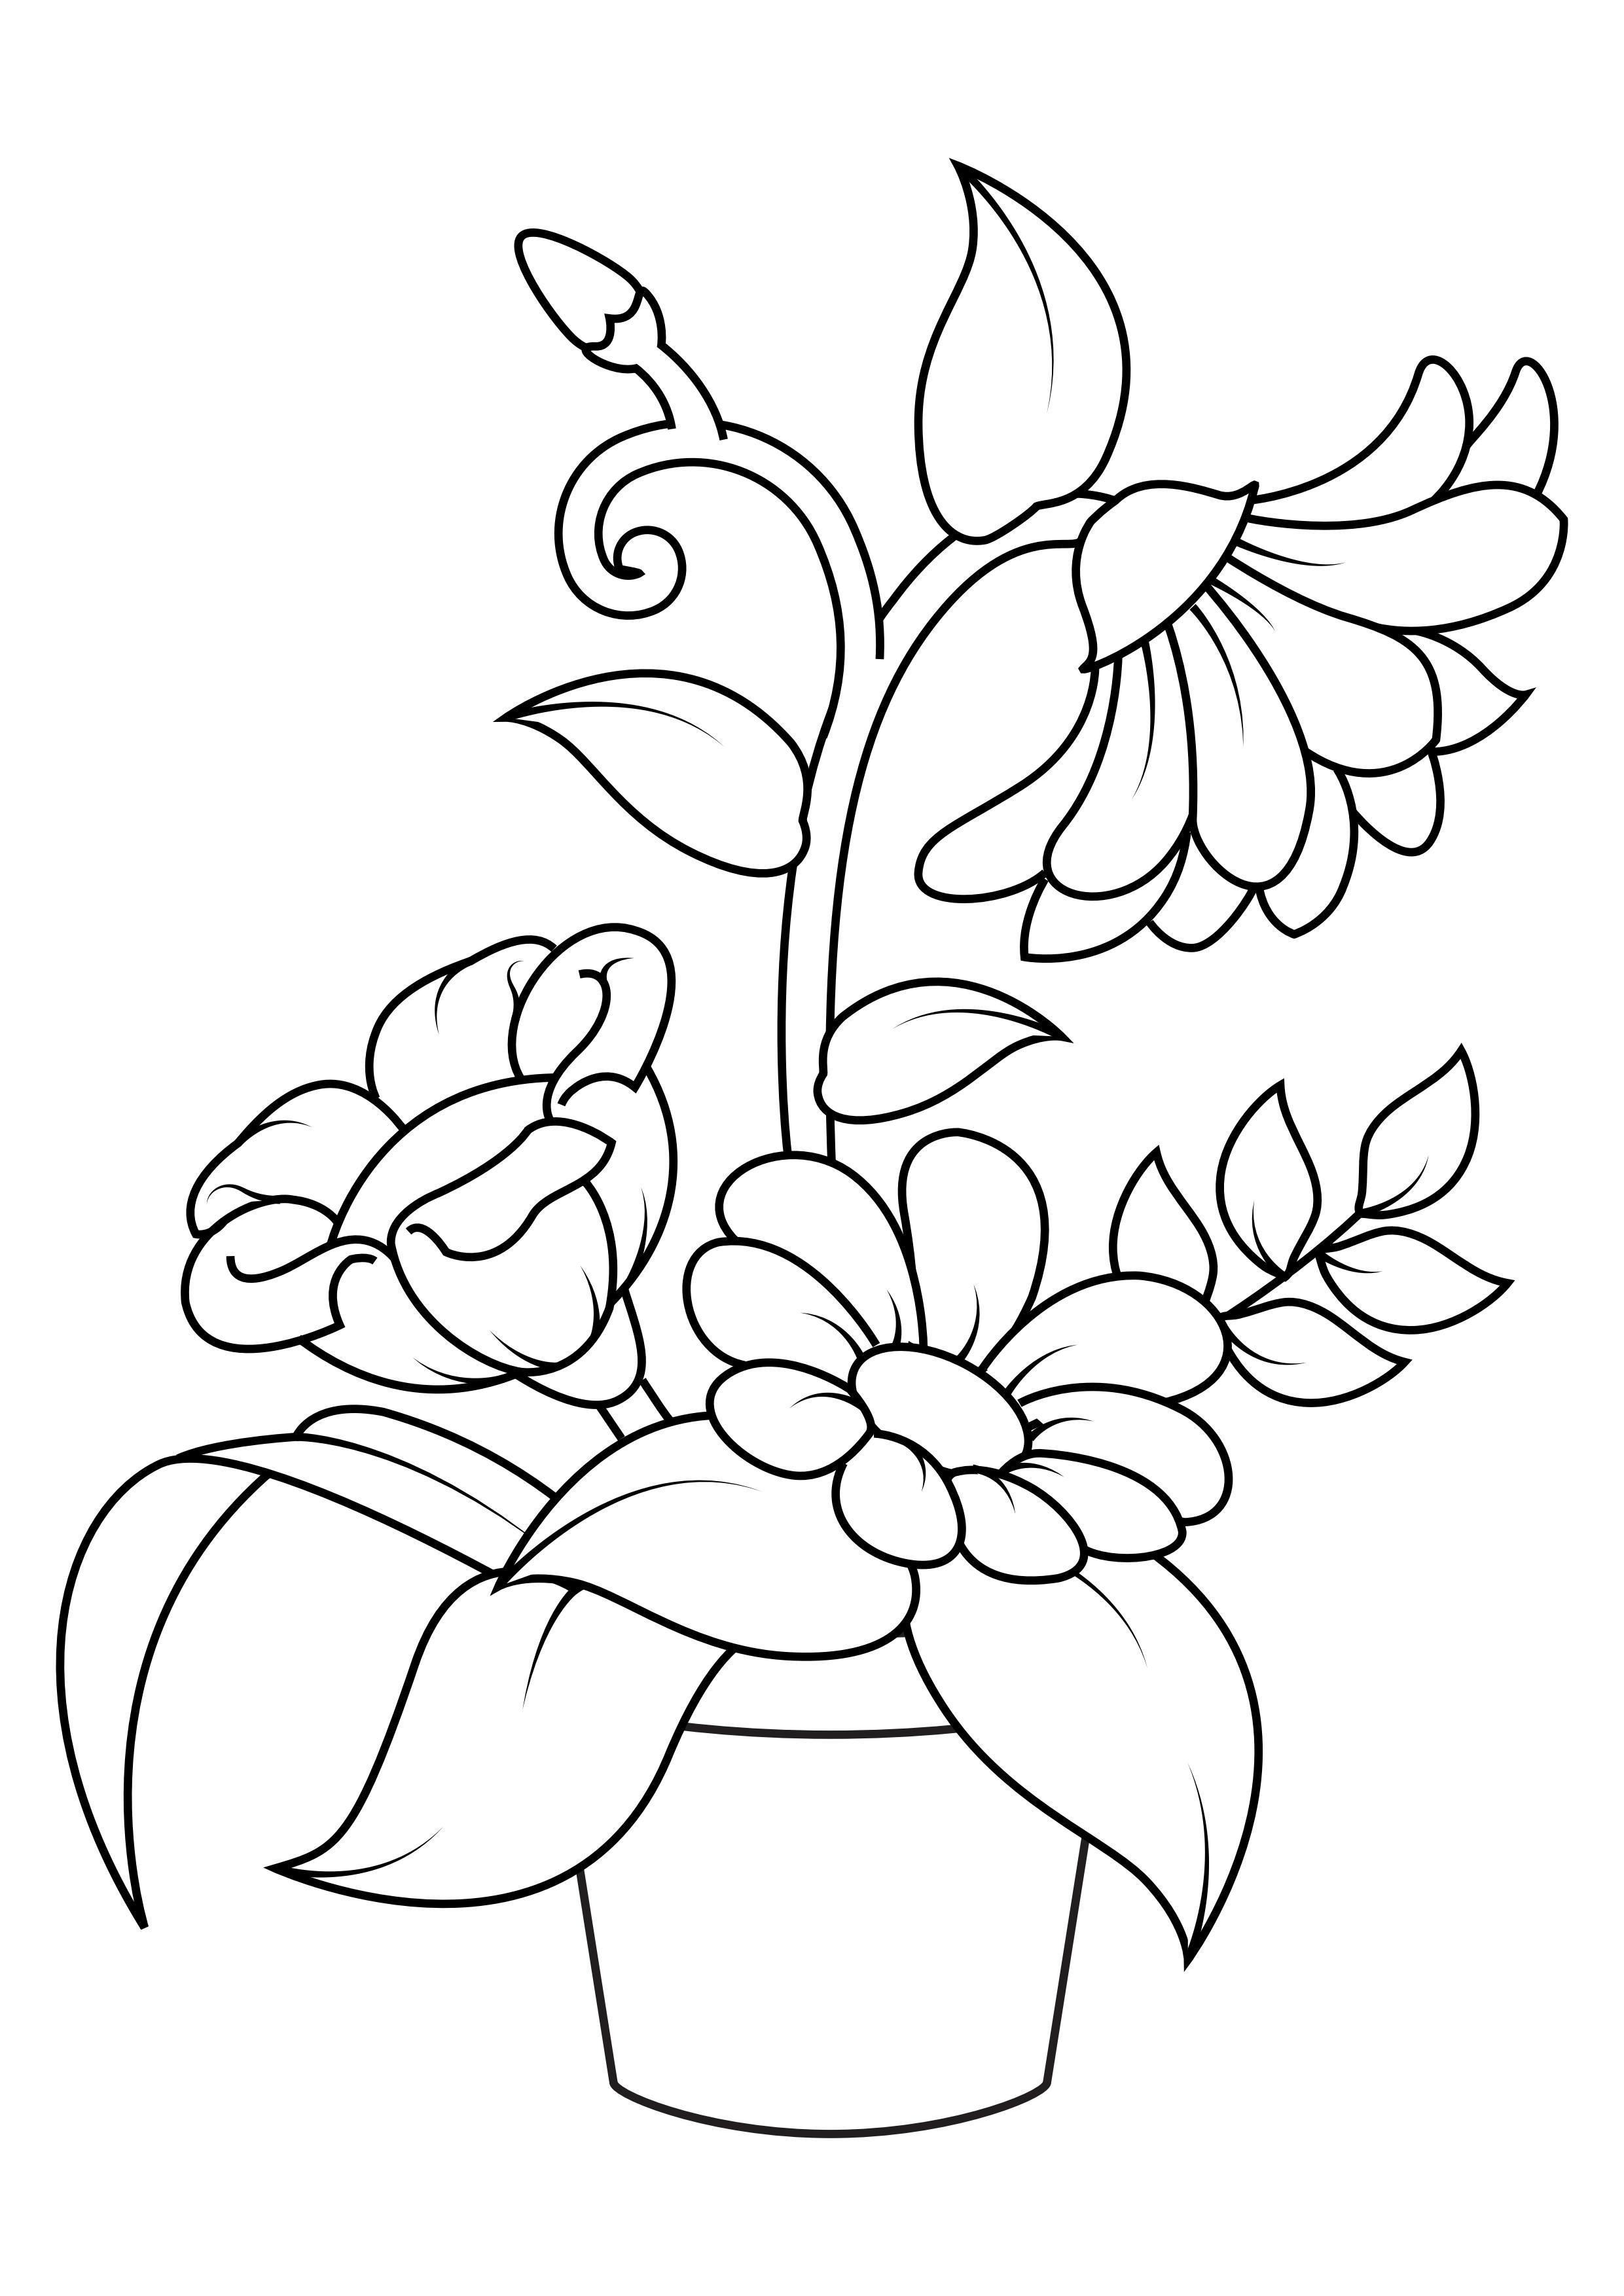 160+ Coloring Page Flowers: Blossom Your Imagination 2